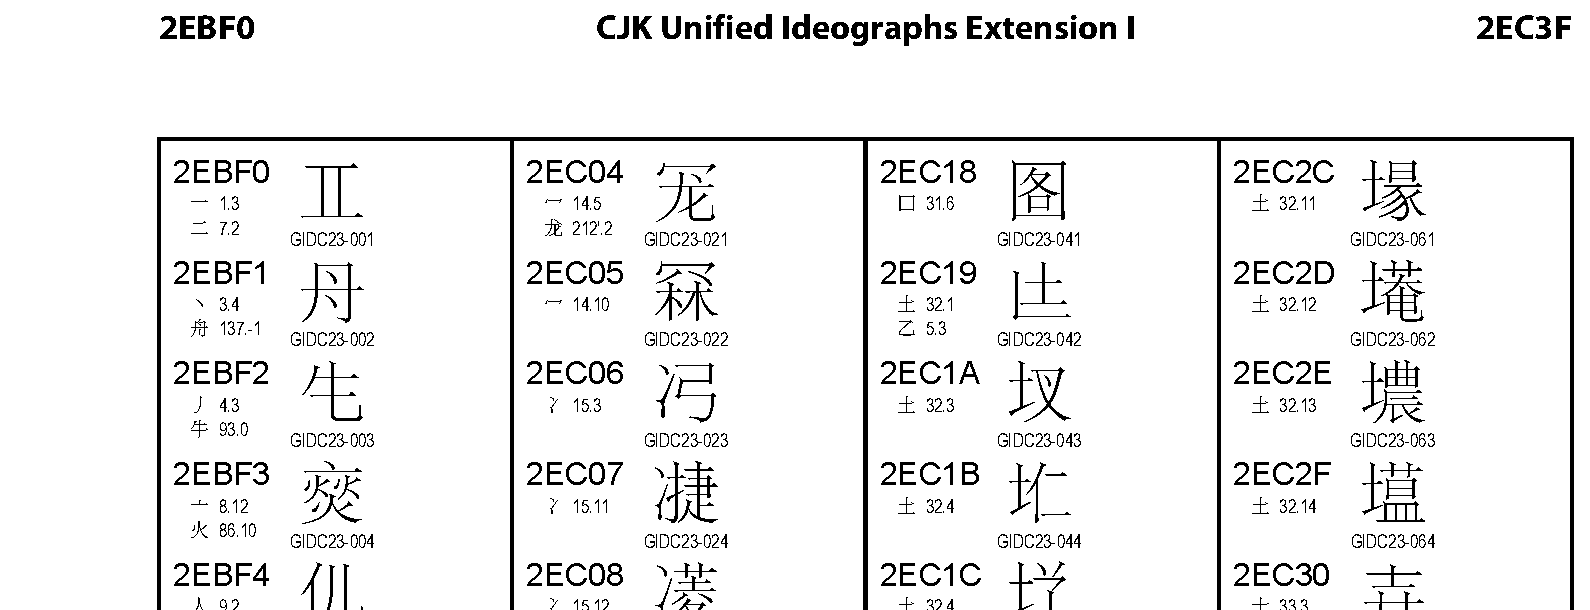 Unicode - CJK Unified Ideographs Extension I